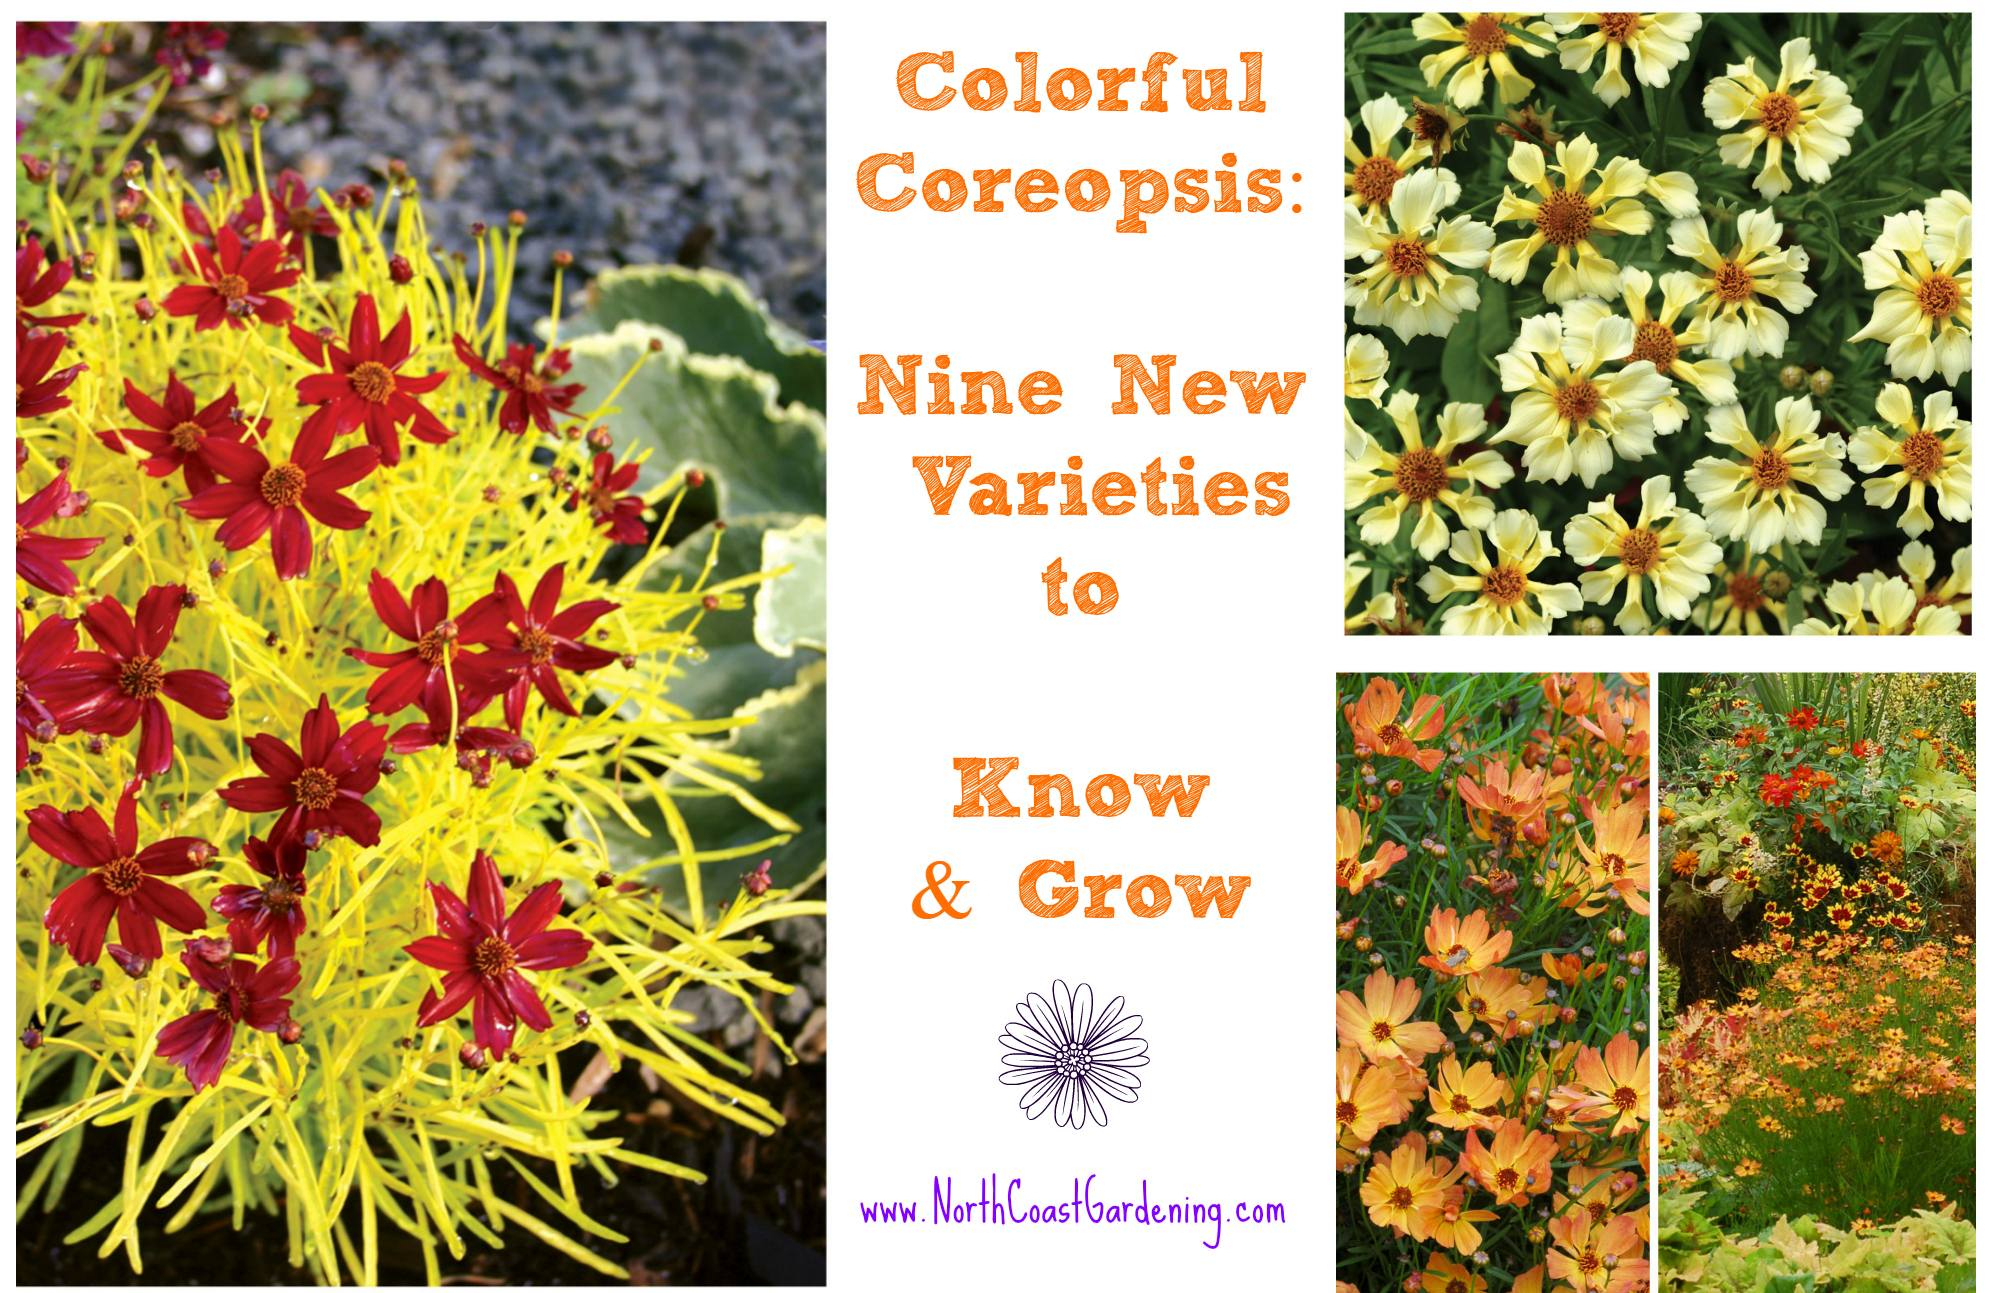 The Many Faces of Coreopsis: New Varieties to Love